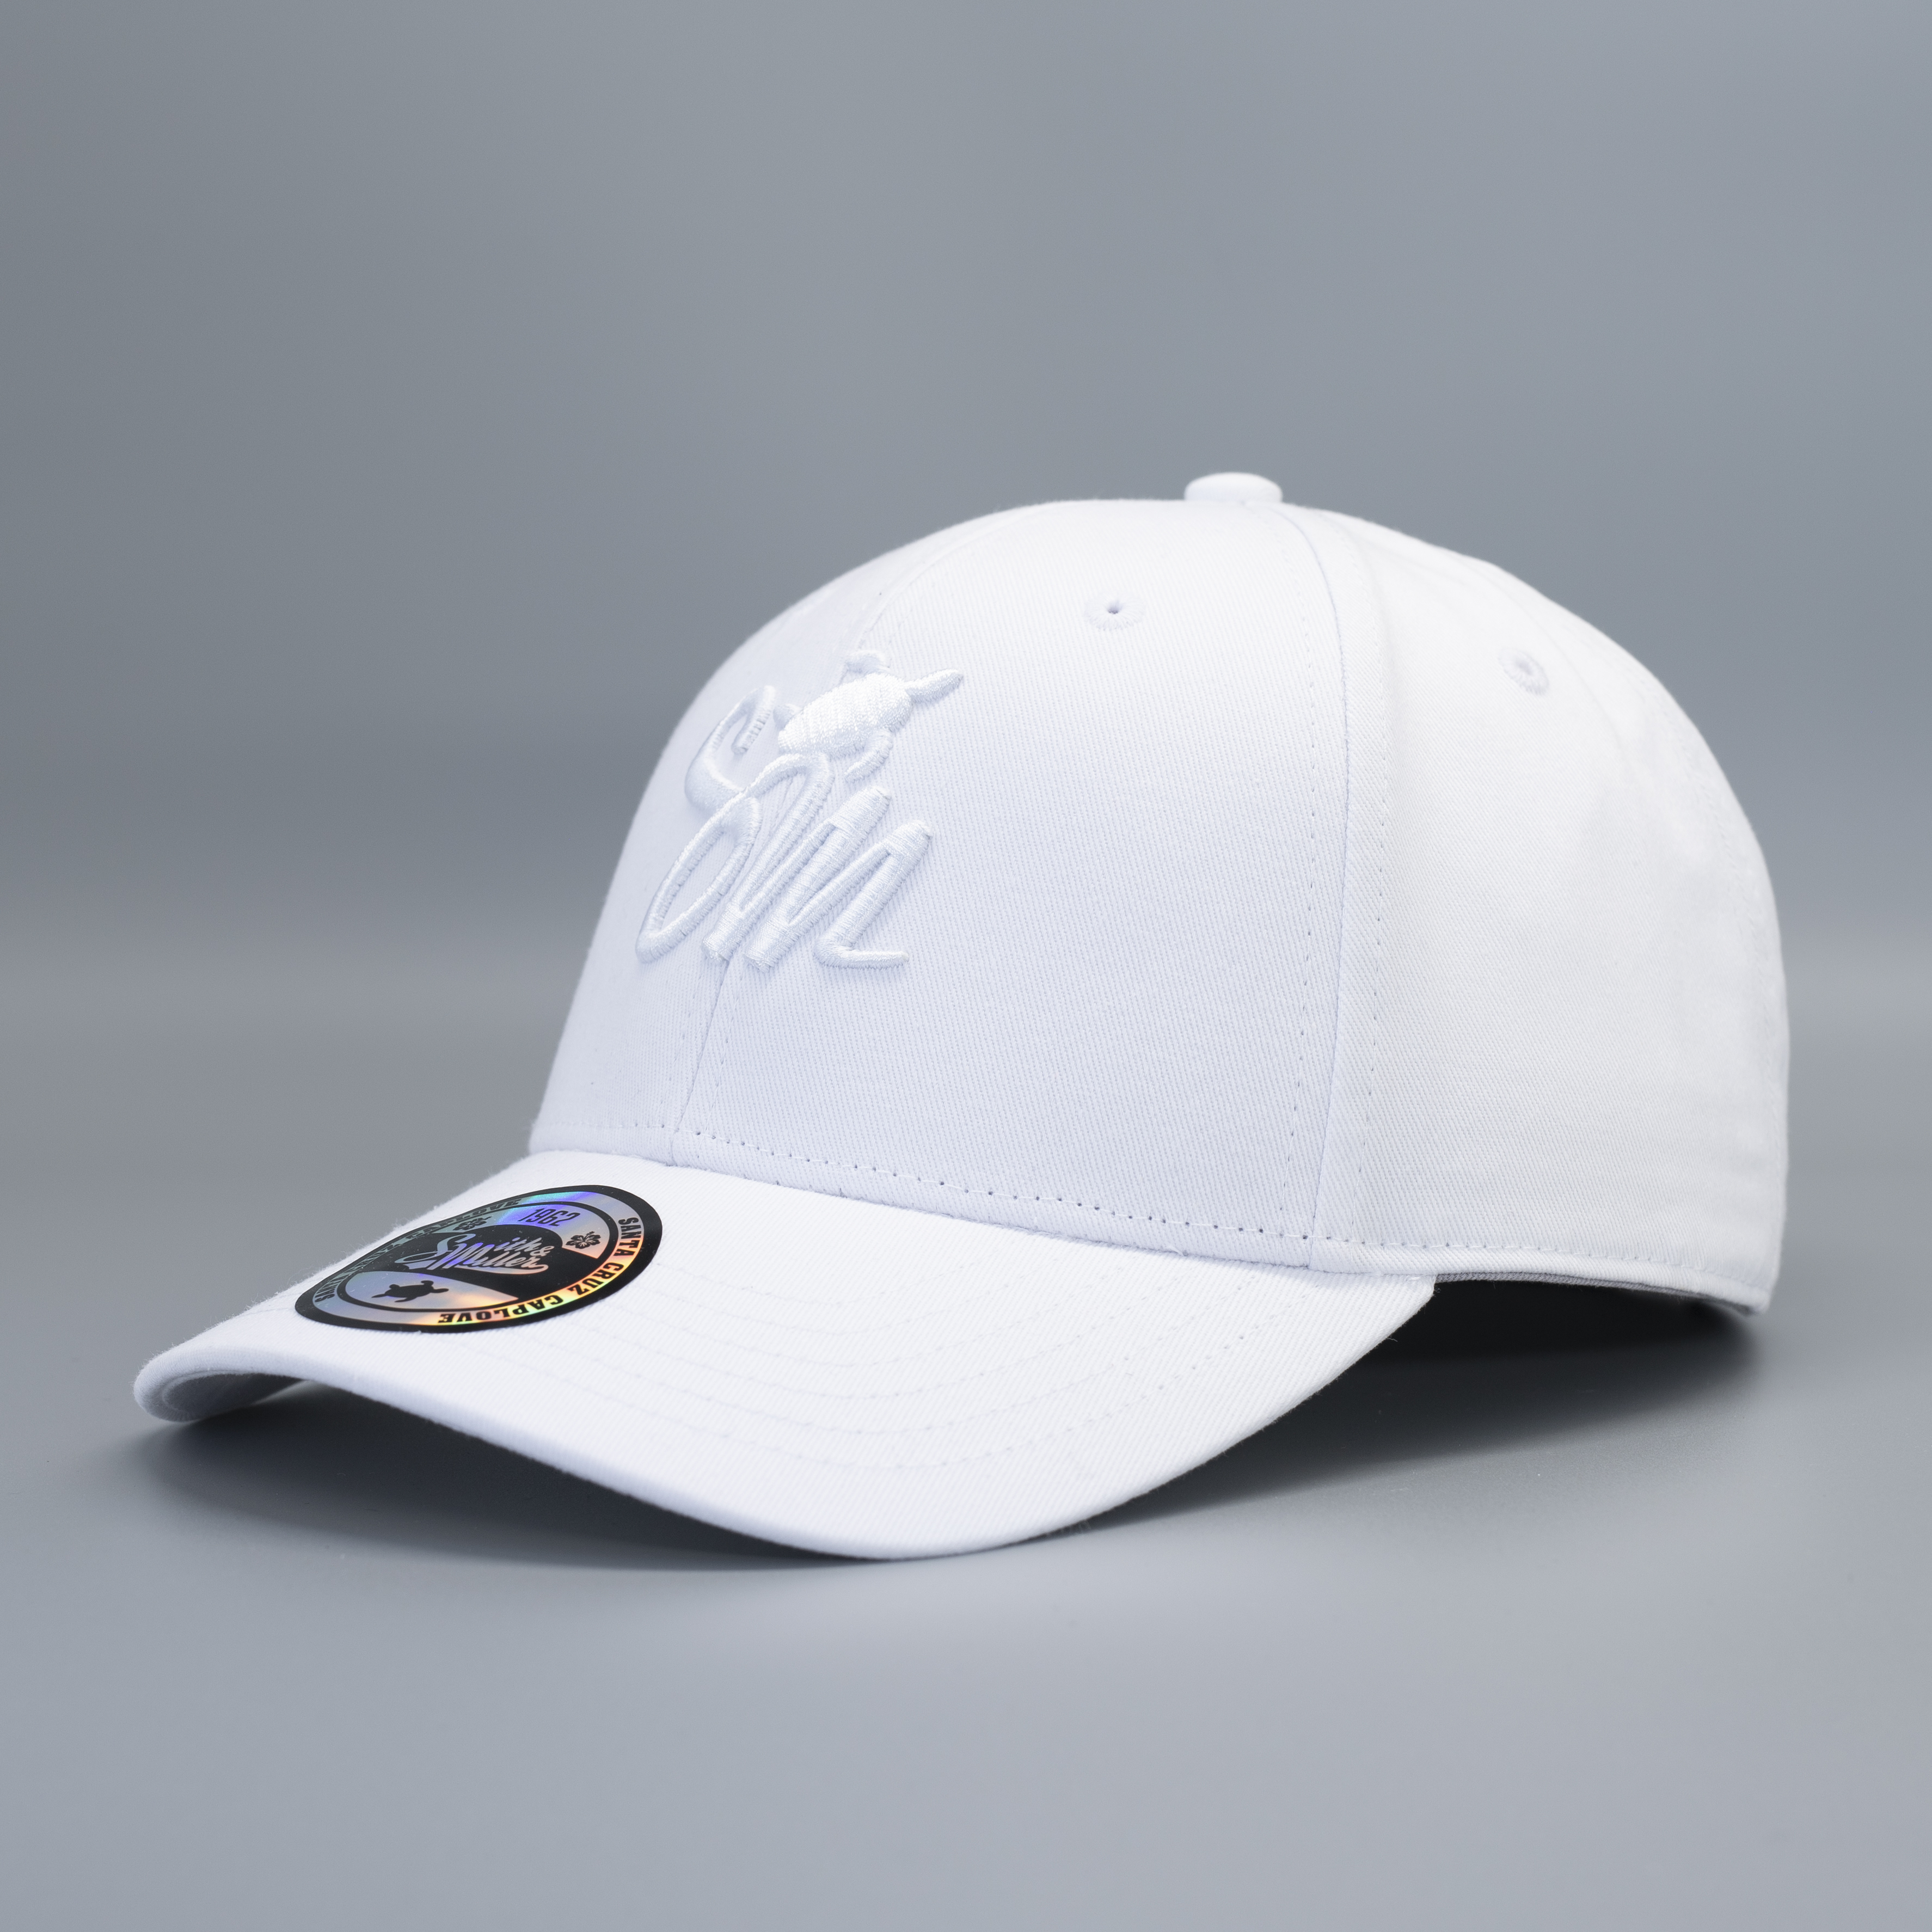 Smith & Miller Bixby Unisex  Curved Cap, white